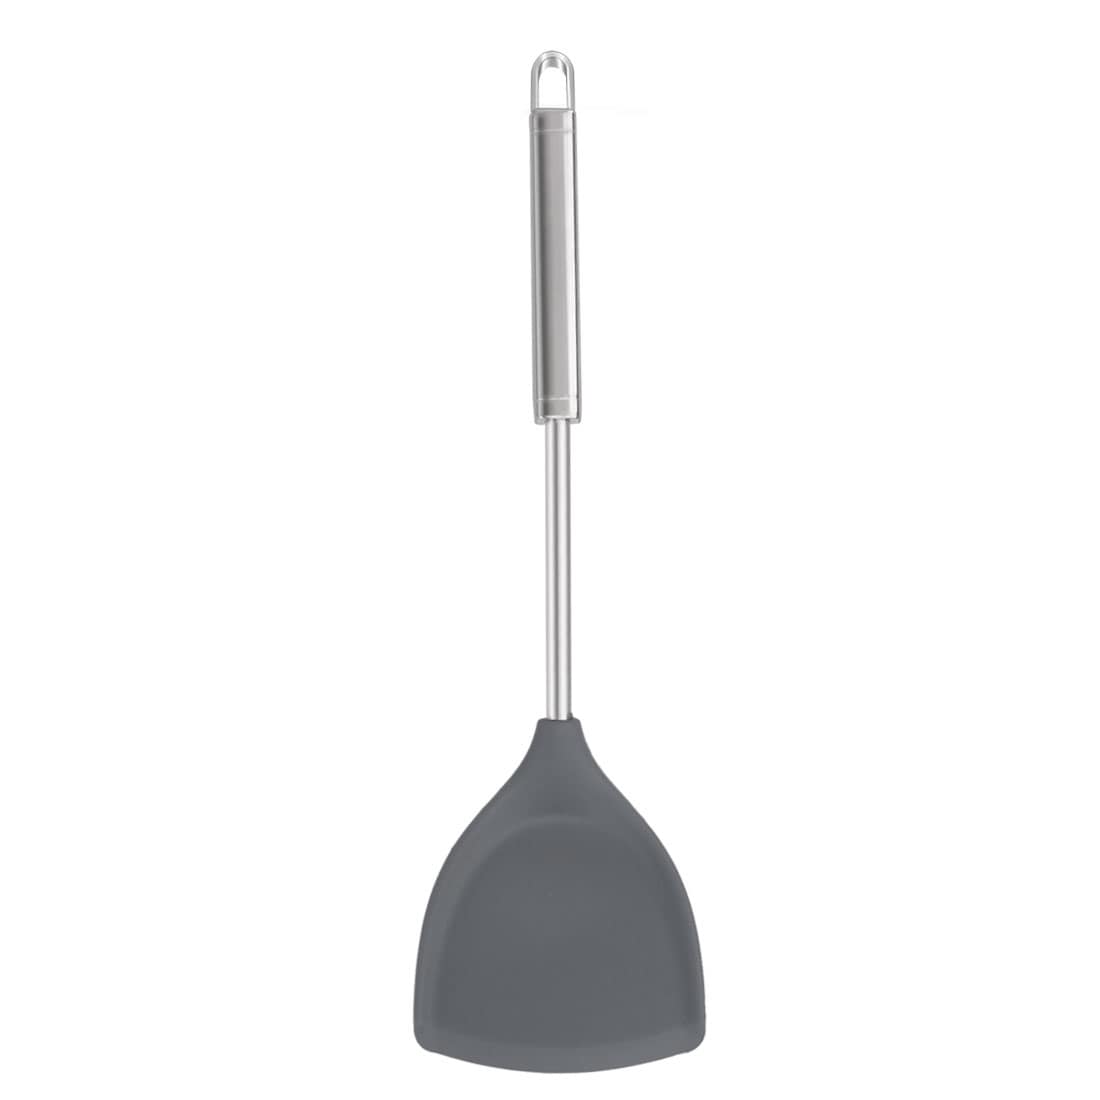 https://ak1.ostkcdn.com/images/products/is/images/direct/acf9844805812c77d25c949469684c0626493078/Silicone-Turner-Spatula-Heat-Resistant-Non-scratch.jpg